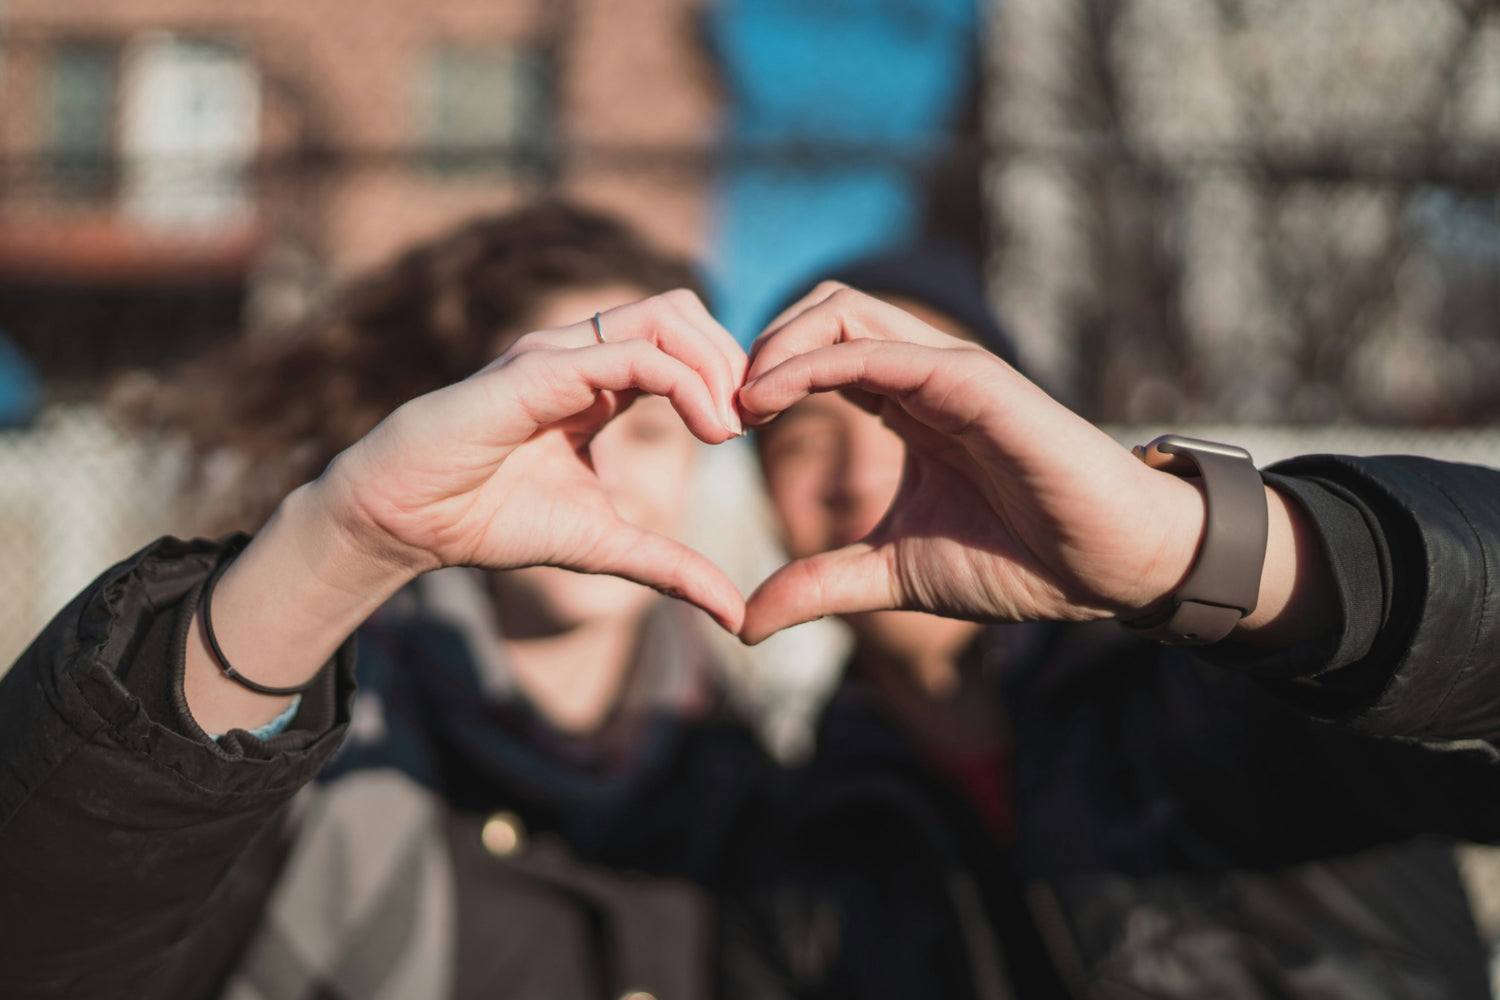 Two people forming a heart shape with their hands, symbolizing love and connection, potential concept for Valentine's gifts for her.